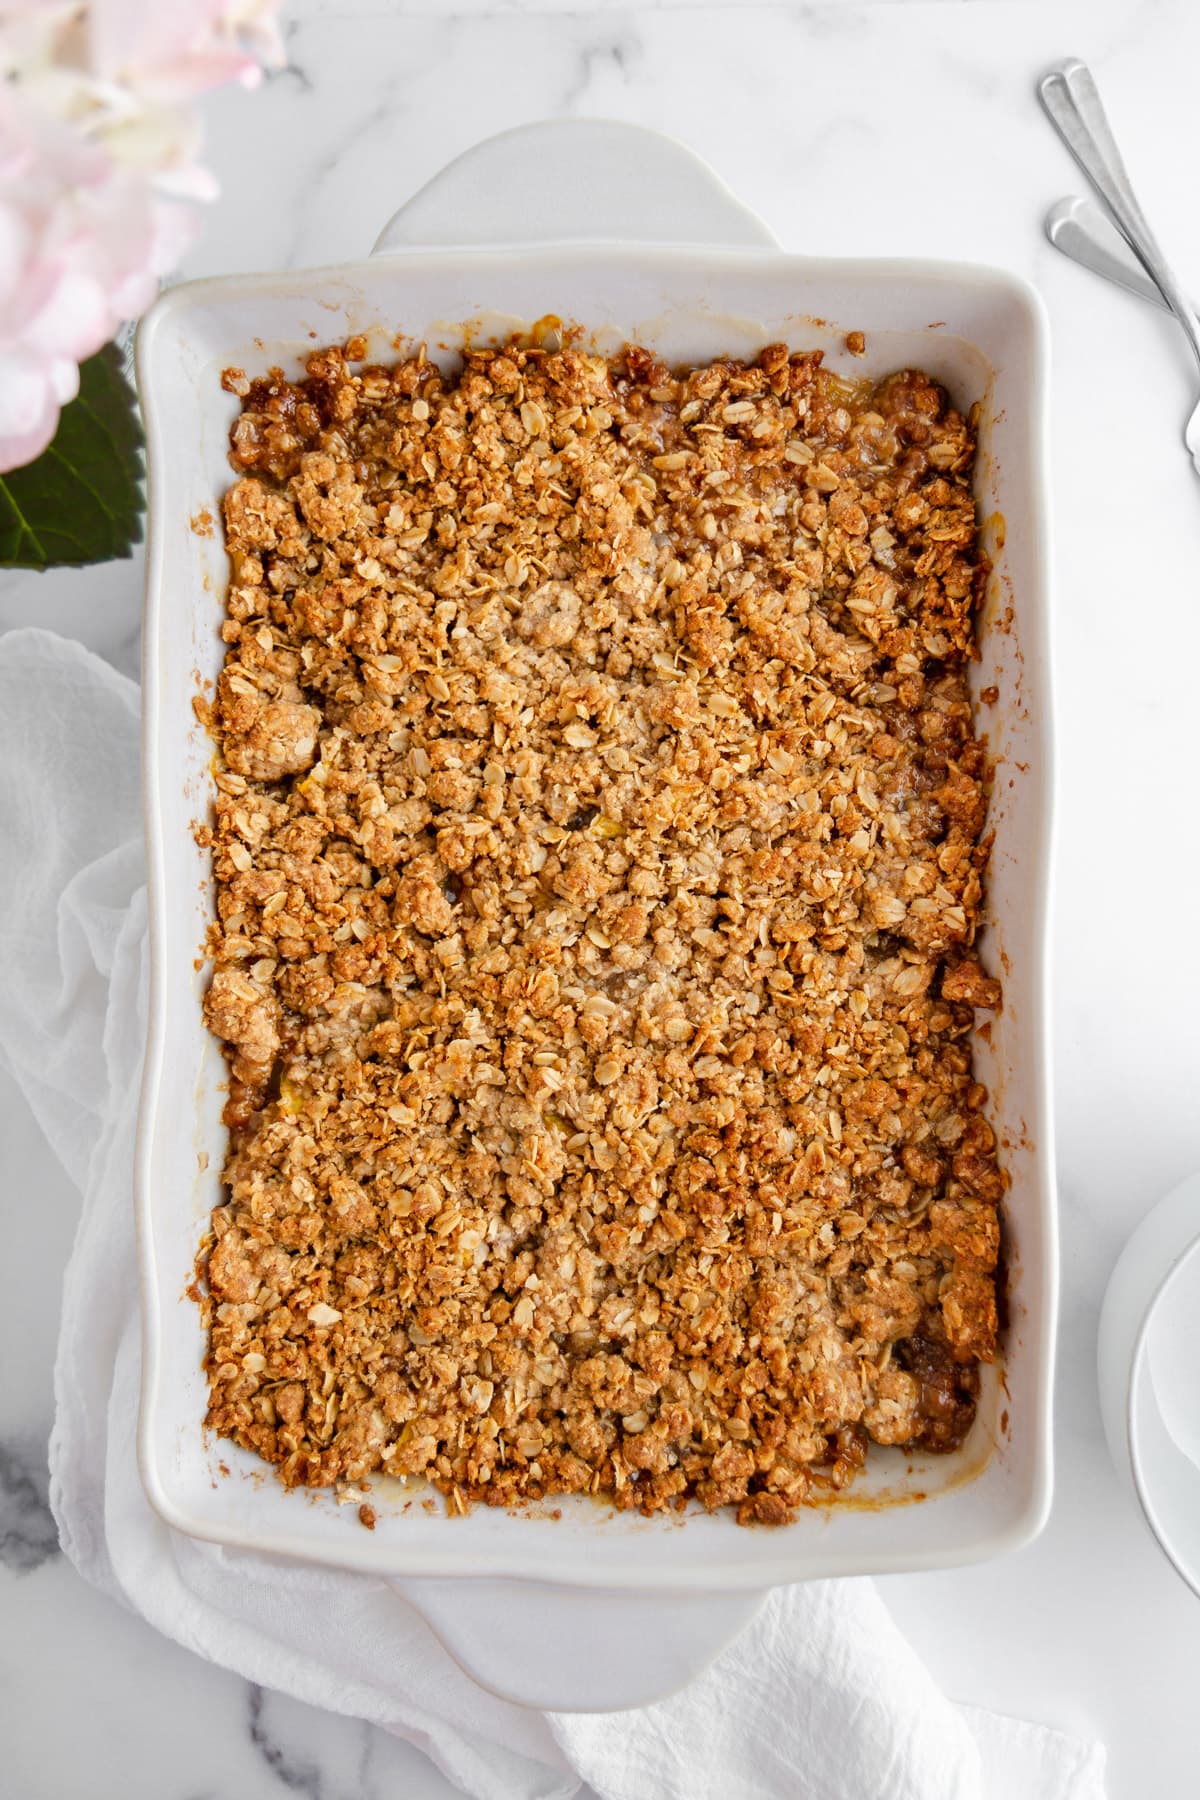 peach crisp with a crunchy oat topping in a baking dish